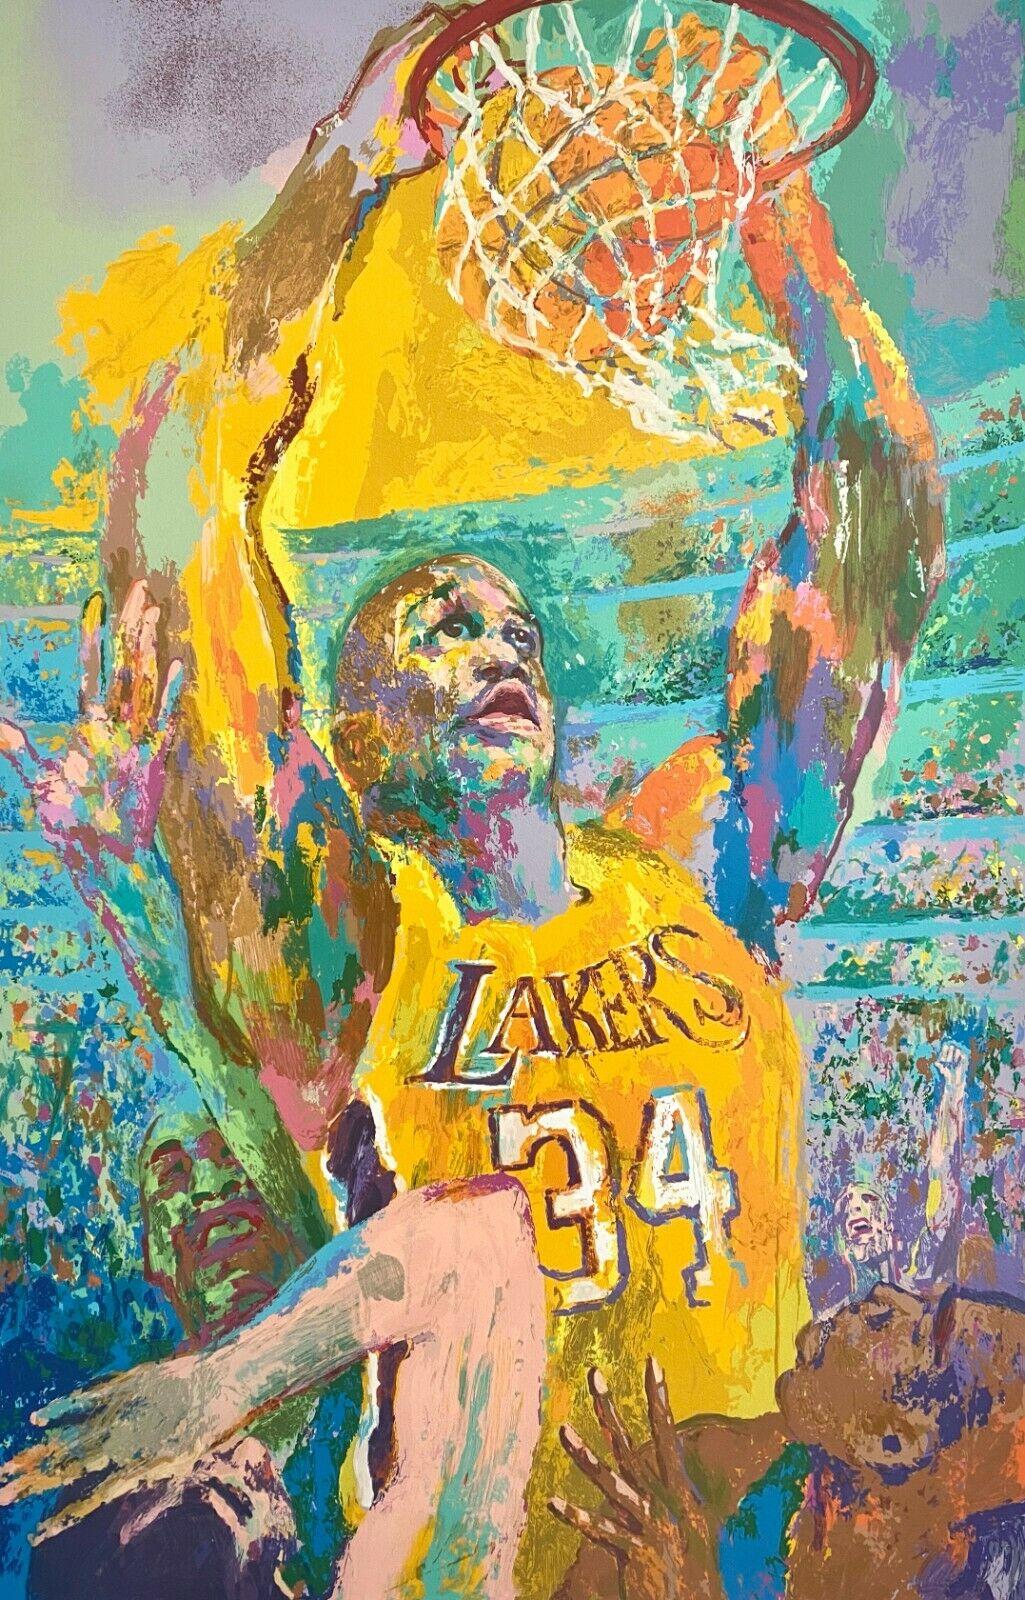 Shaq (Shaquille O'Neal / Los Angeles Lakers), LeRoy Neiman